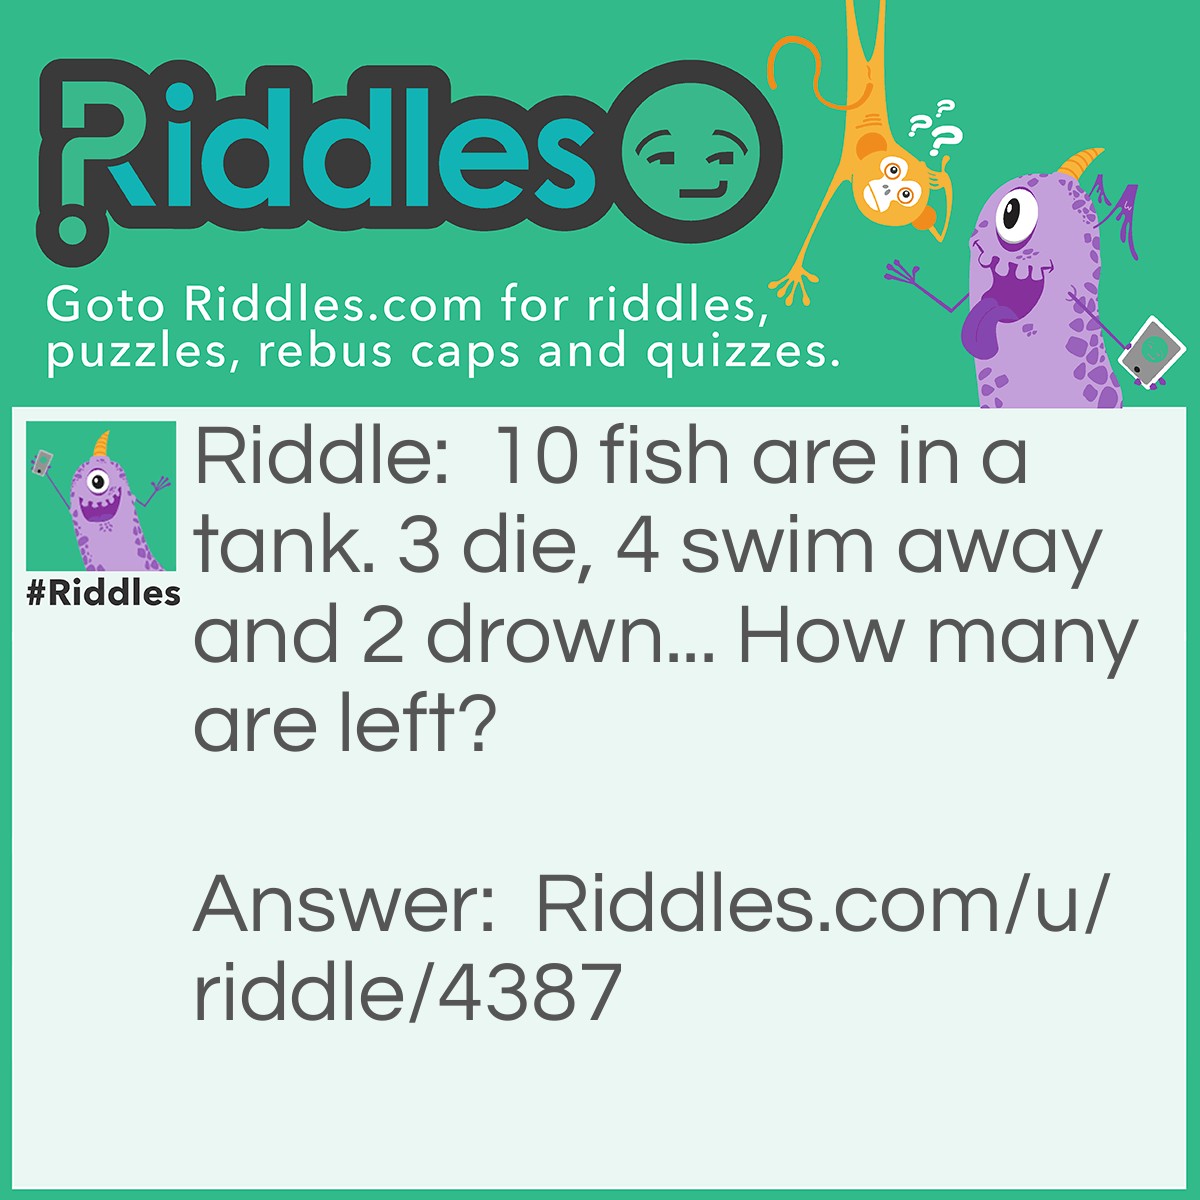 Riddle: 10 fish are in a tank. 3 die, 4 swim away and 2 drown... How many are left? Answer: 10 duh...they're all in the tank.